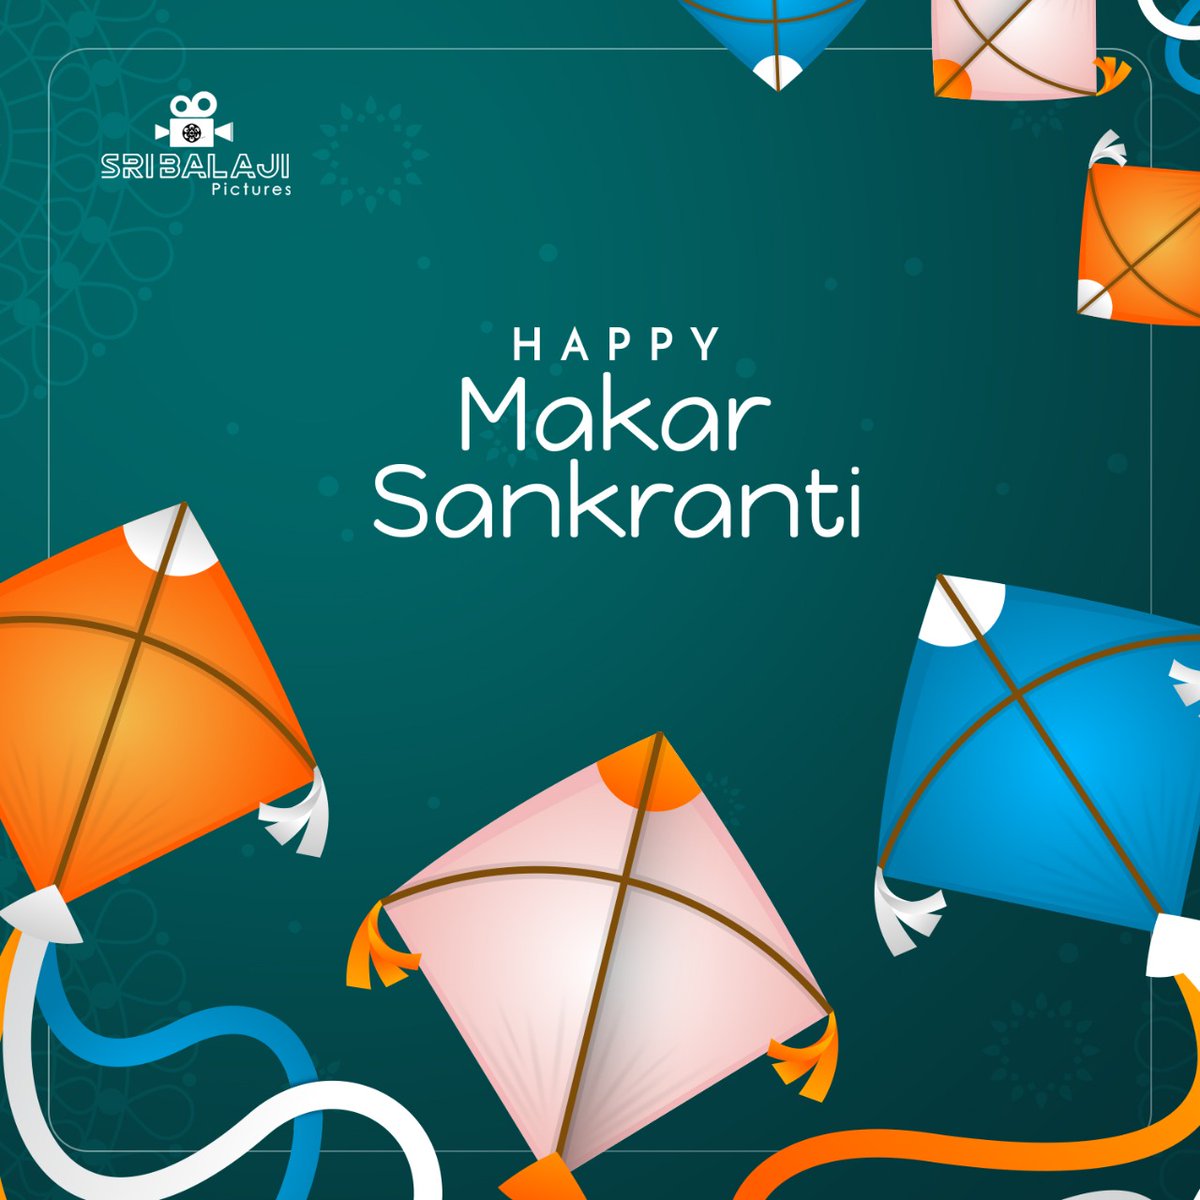 we wish you are blessed with happiness, peace, and prosperity🎉🎉
#HappyMakarSankranti 
#SriBalajiPictures